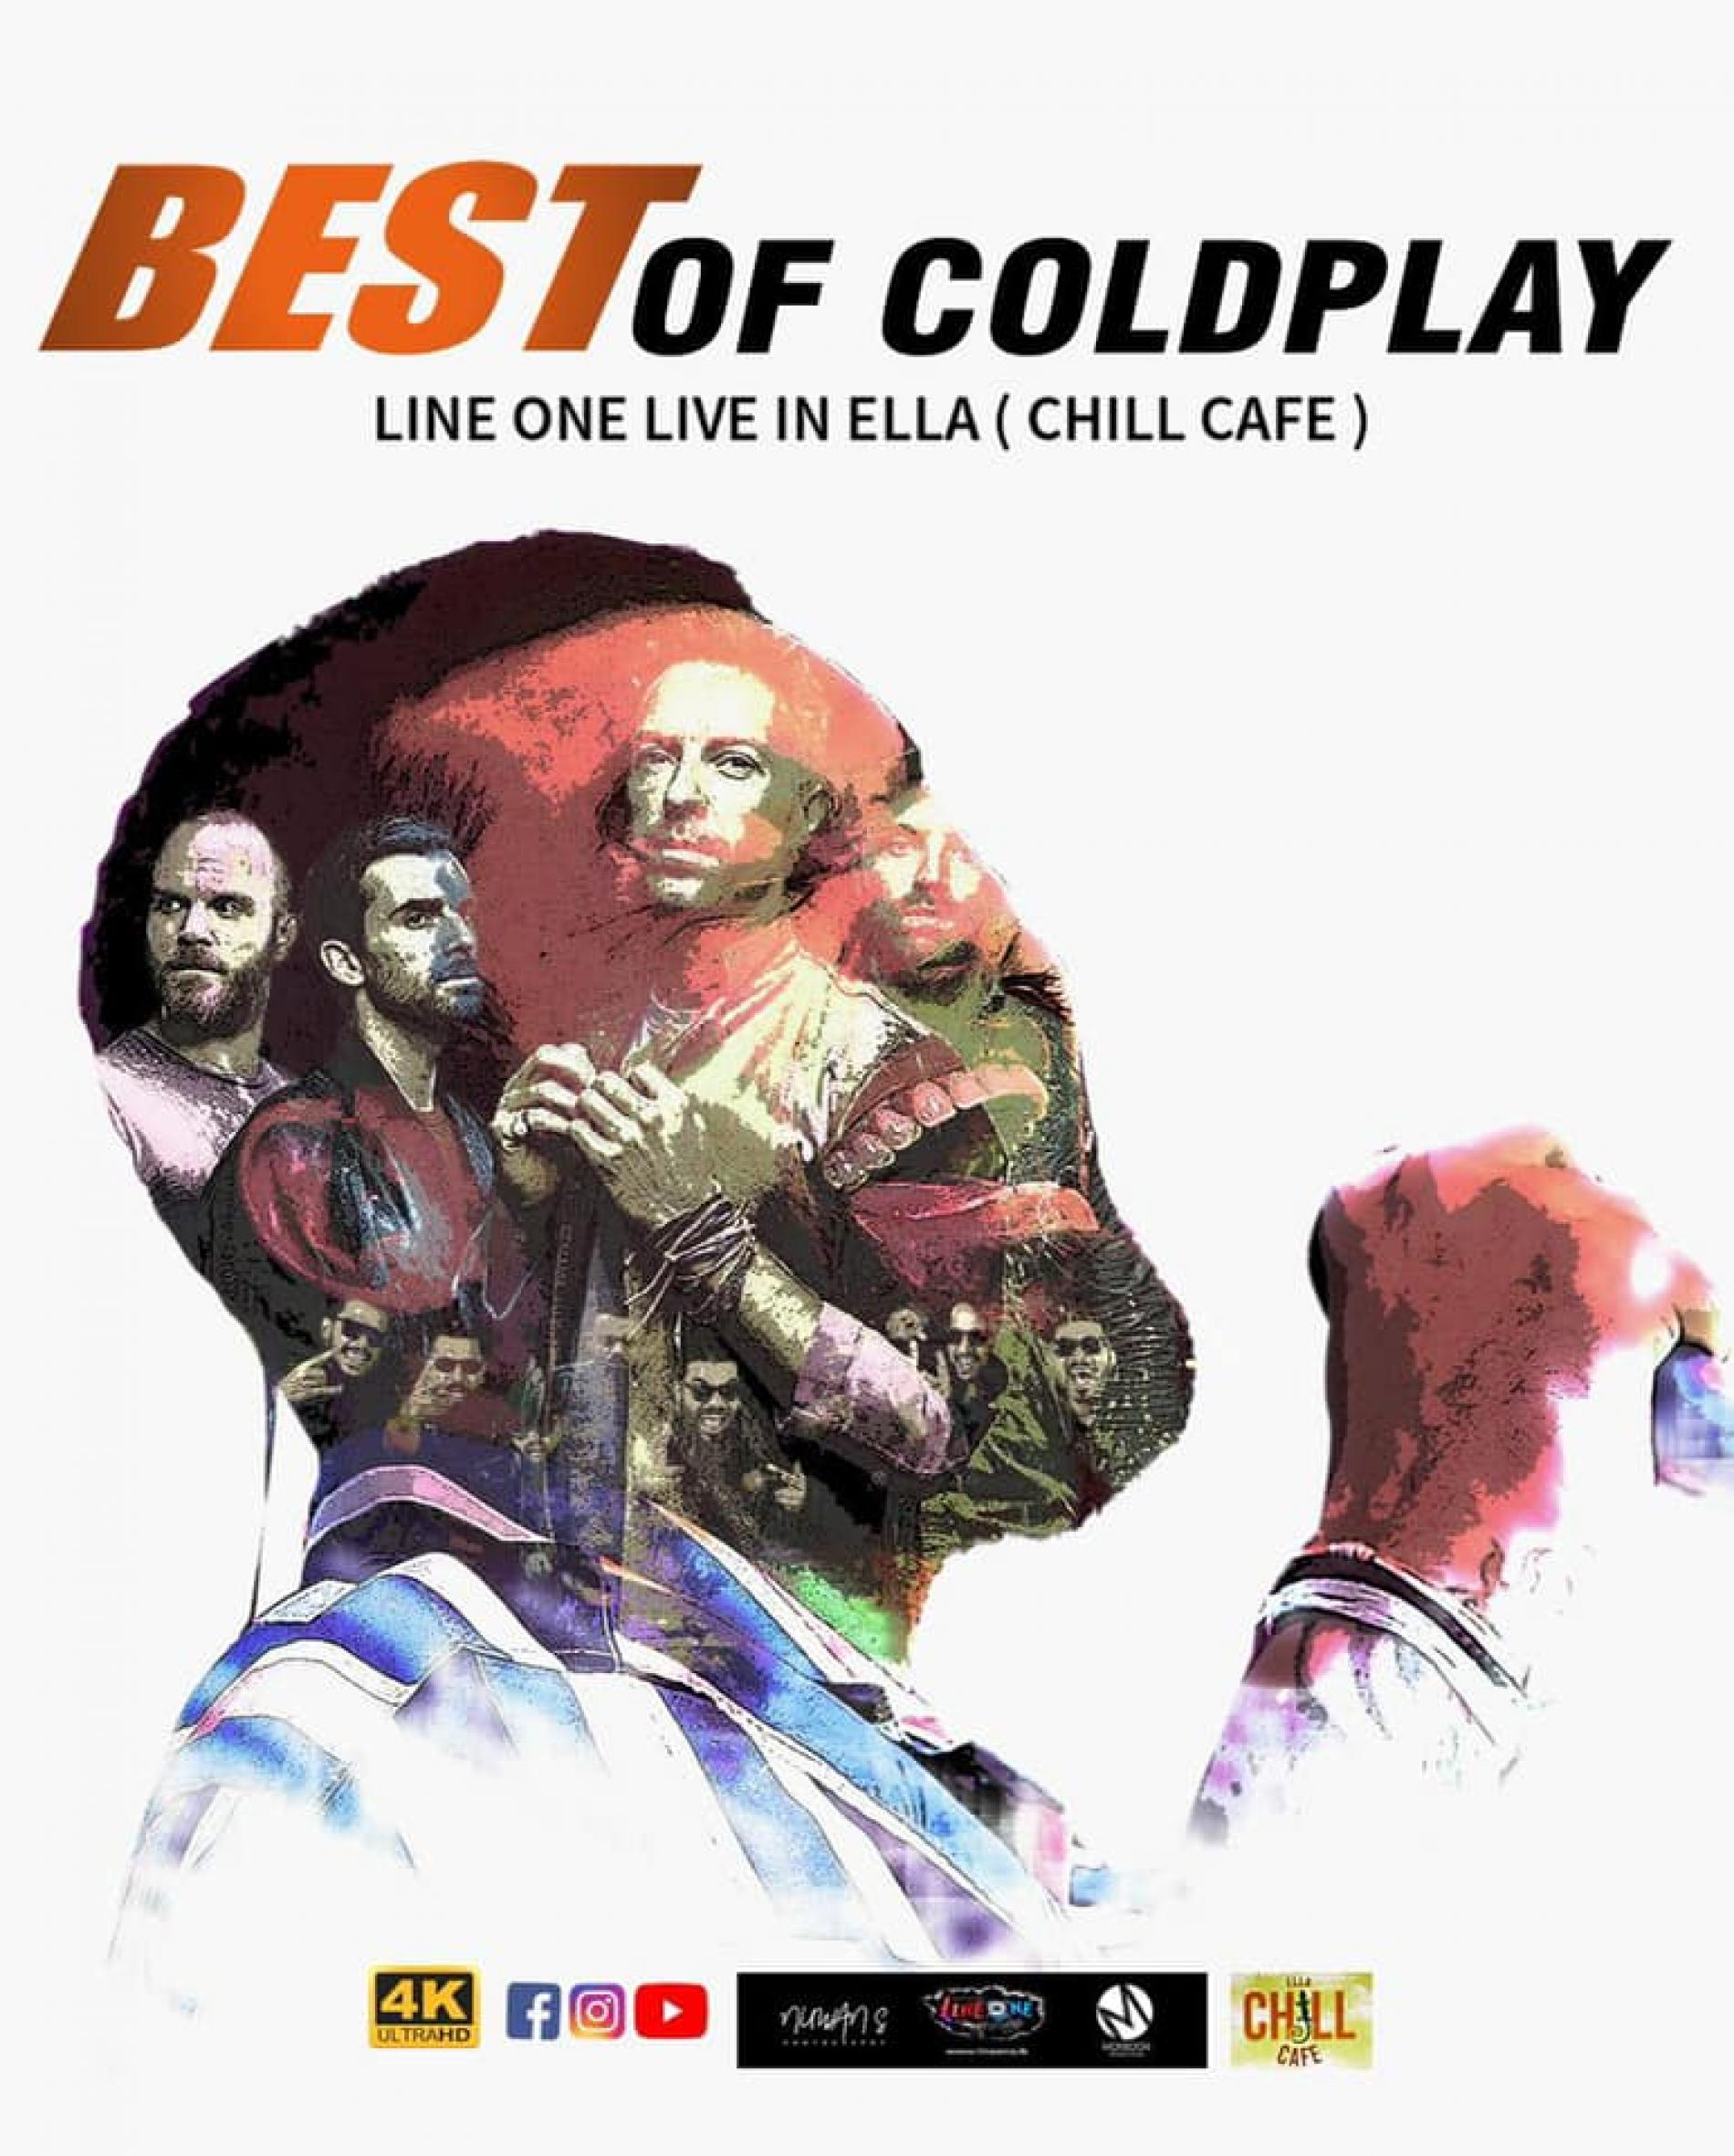 New Music : Best Of Coldplay | Line One Live